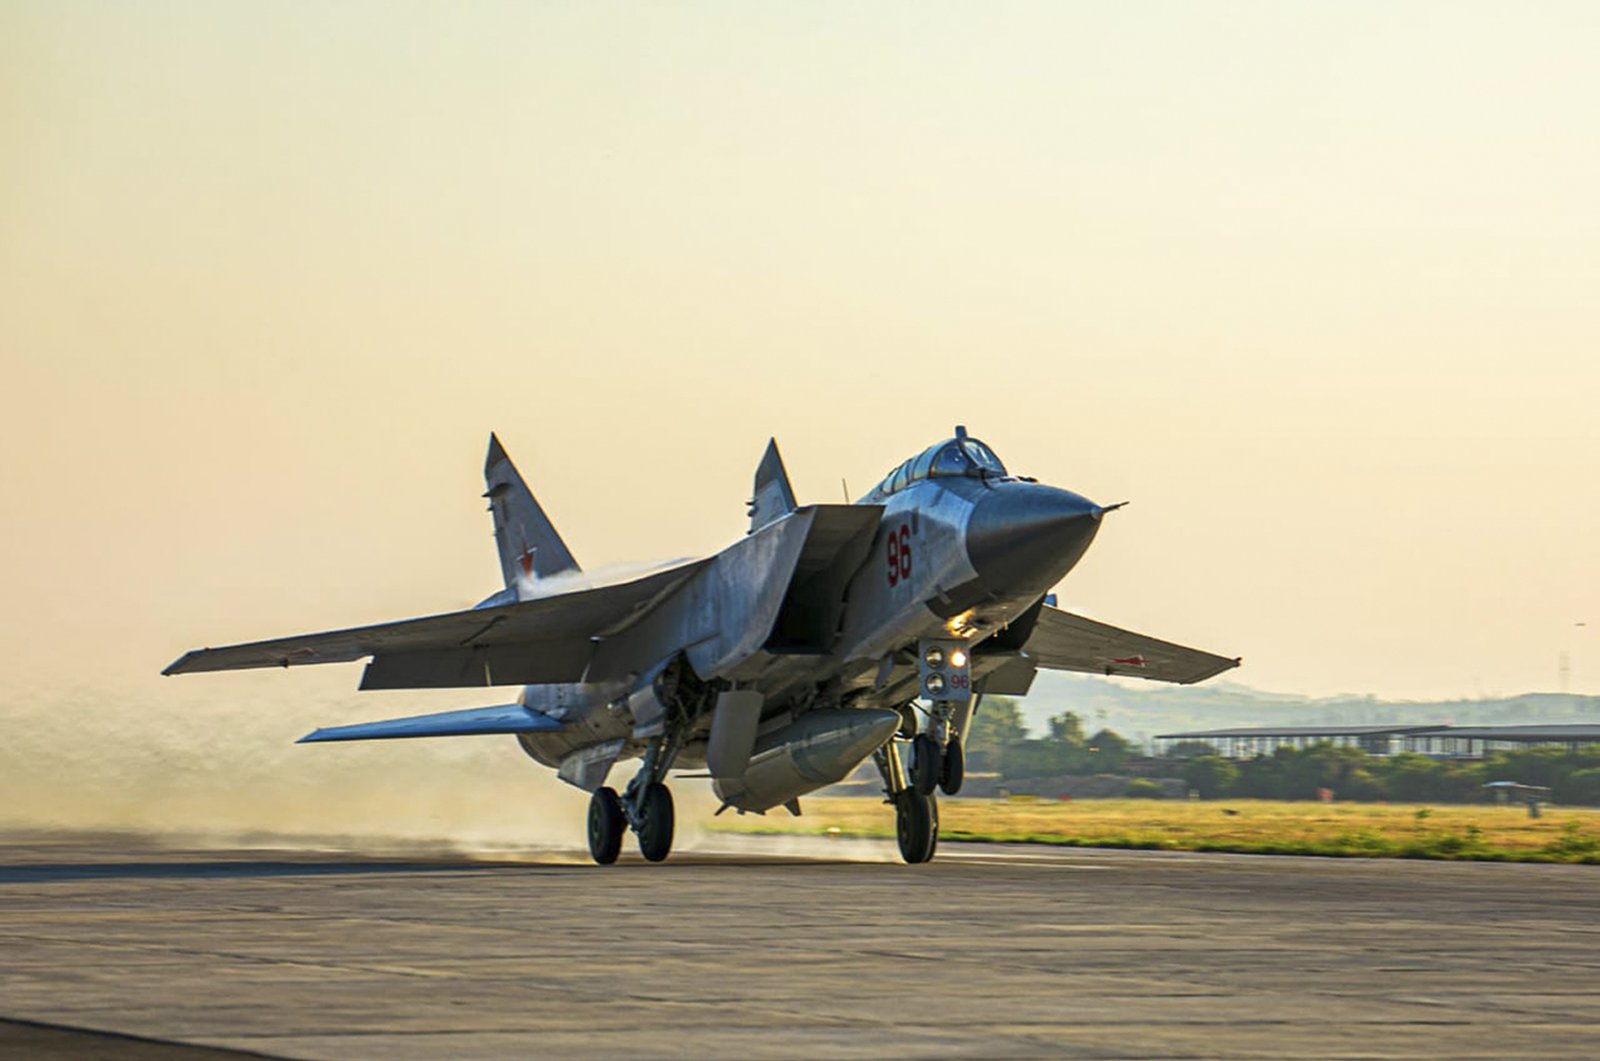 A Russian MiG-31 fighter jet carrying a Kinzhal missile takes off from the Hemeimeem air base in Syria in this photo released on June 25, 2021. (Russian Defense Ministry Press Service via AP)